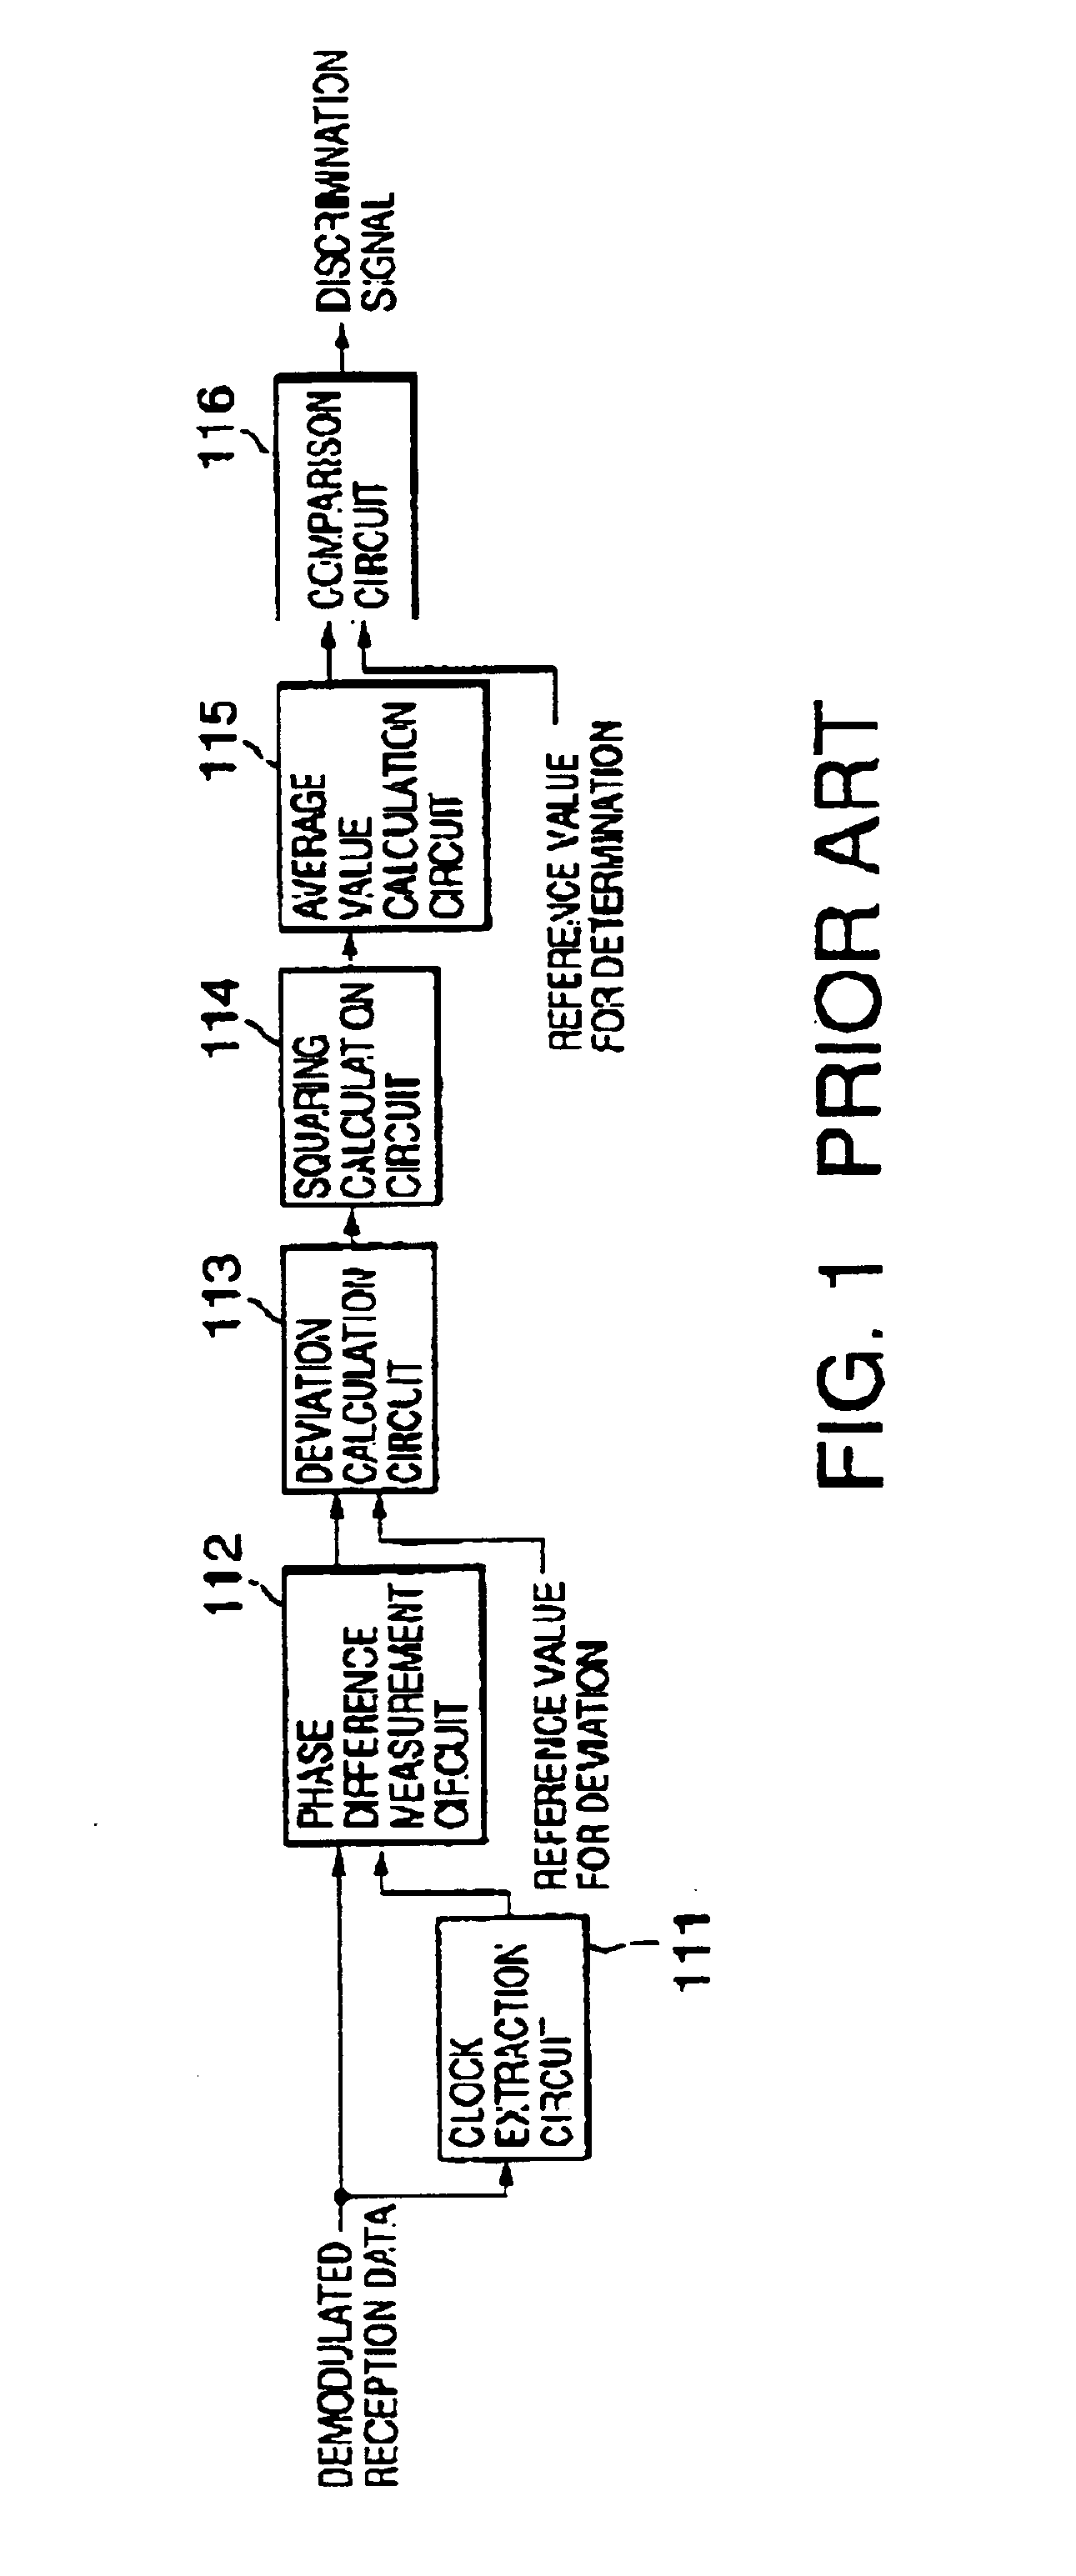 Automatic modulation type discrimination apparatus and automatic modulation type discrimination method capable of discriminating plural kinds of modulation types